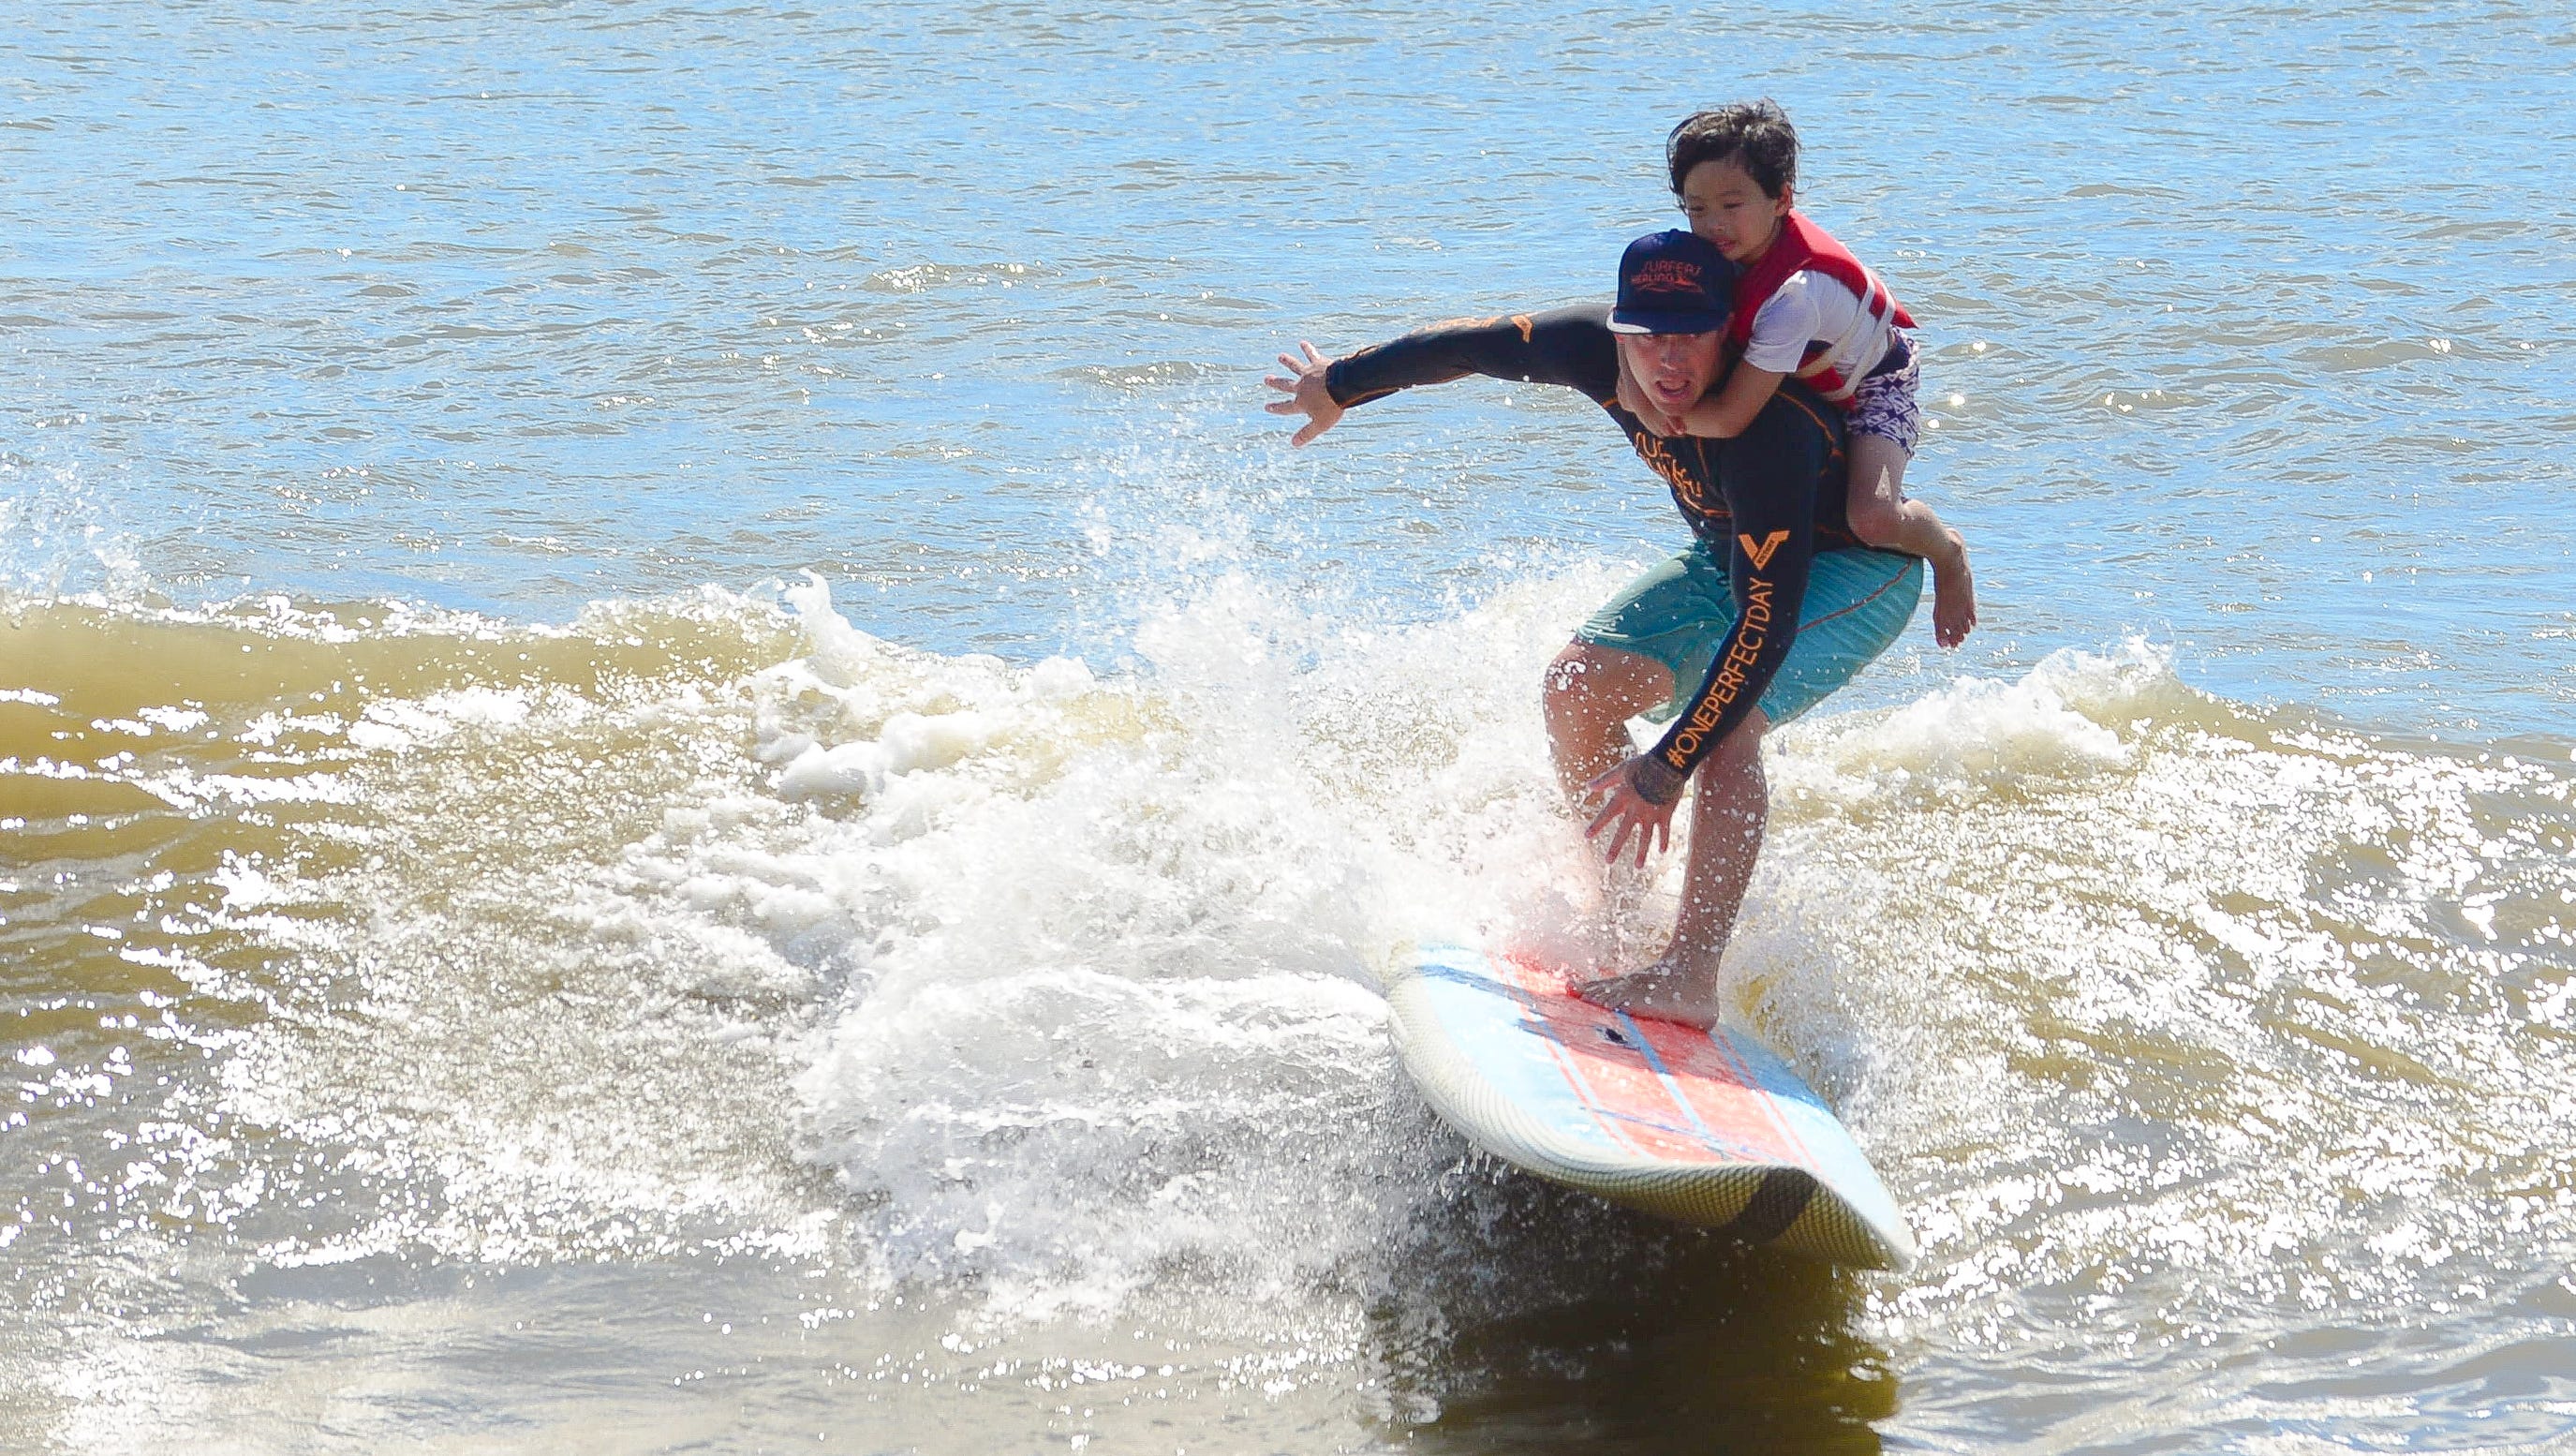 children-with-autism-find-peace-surfing-in-oc